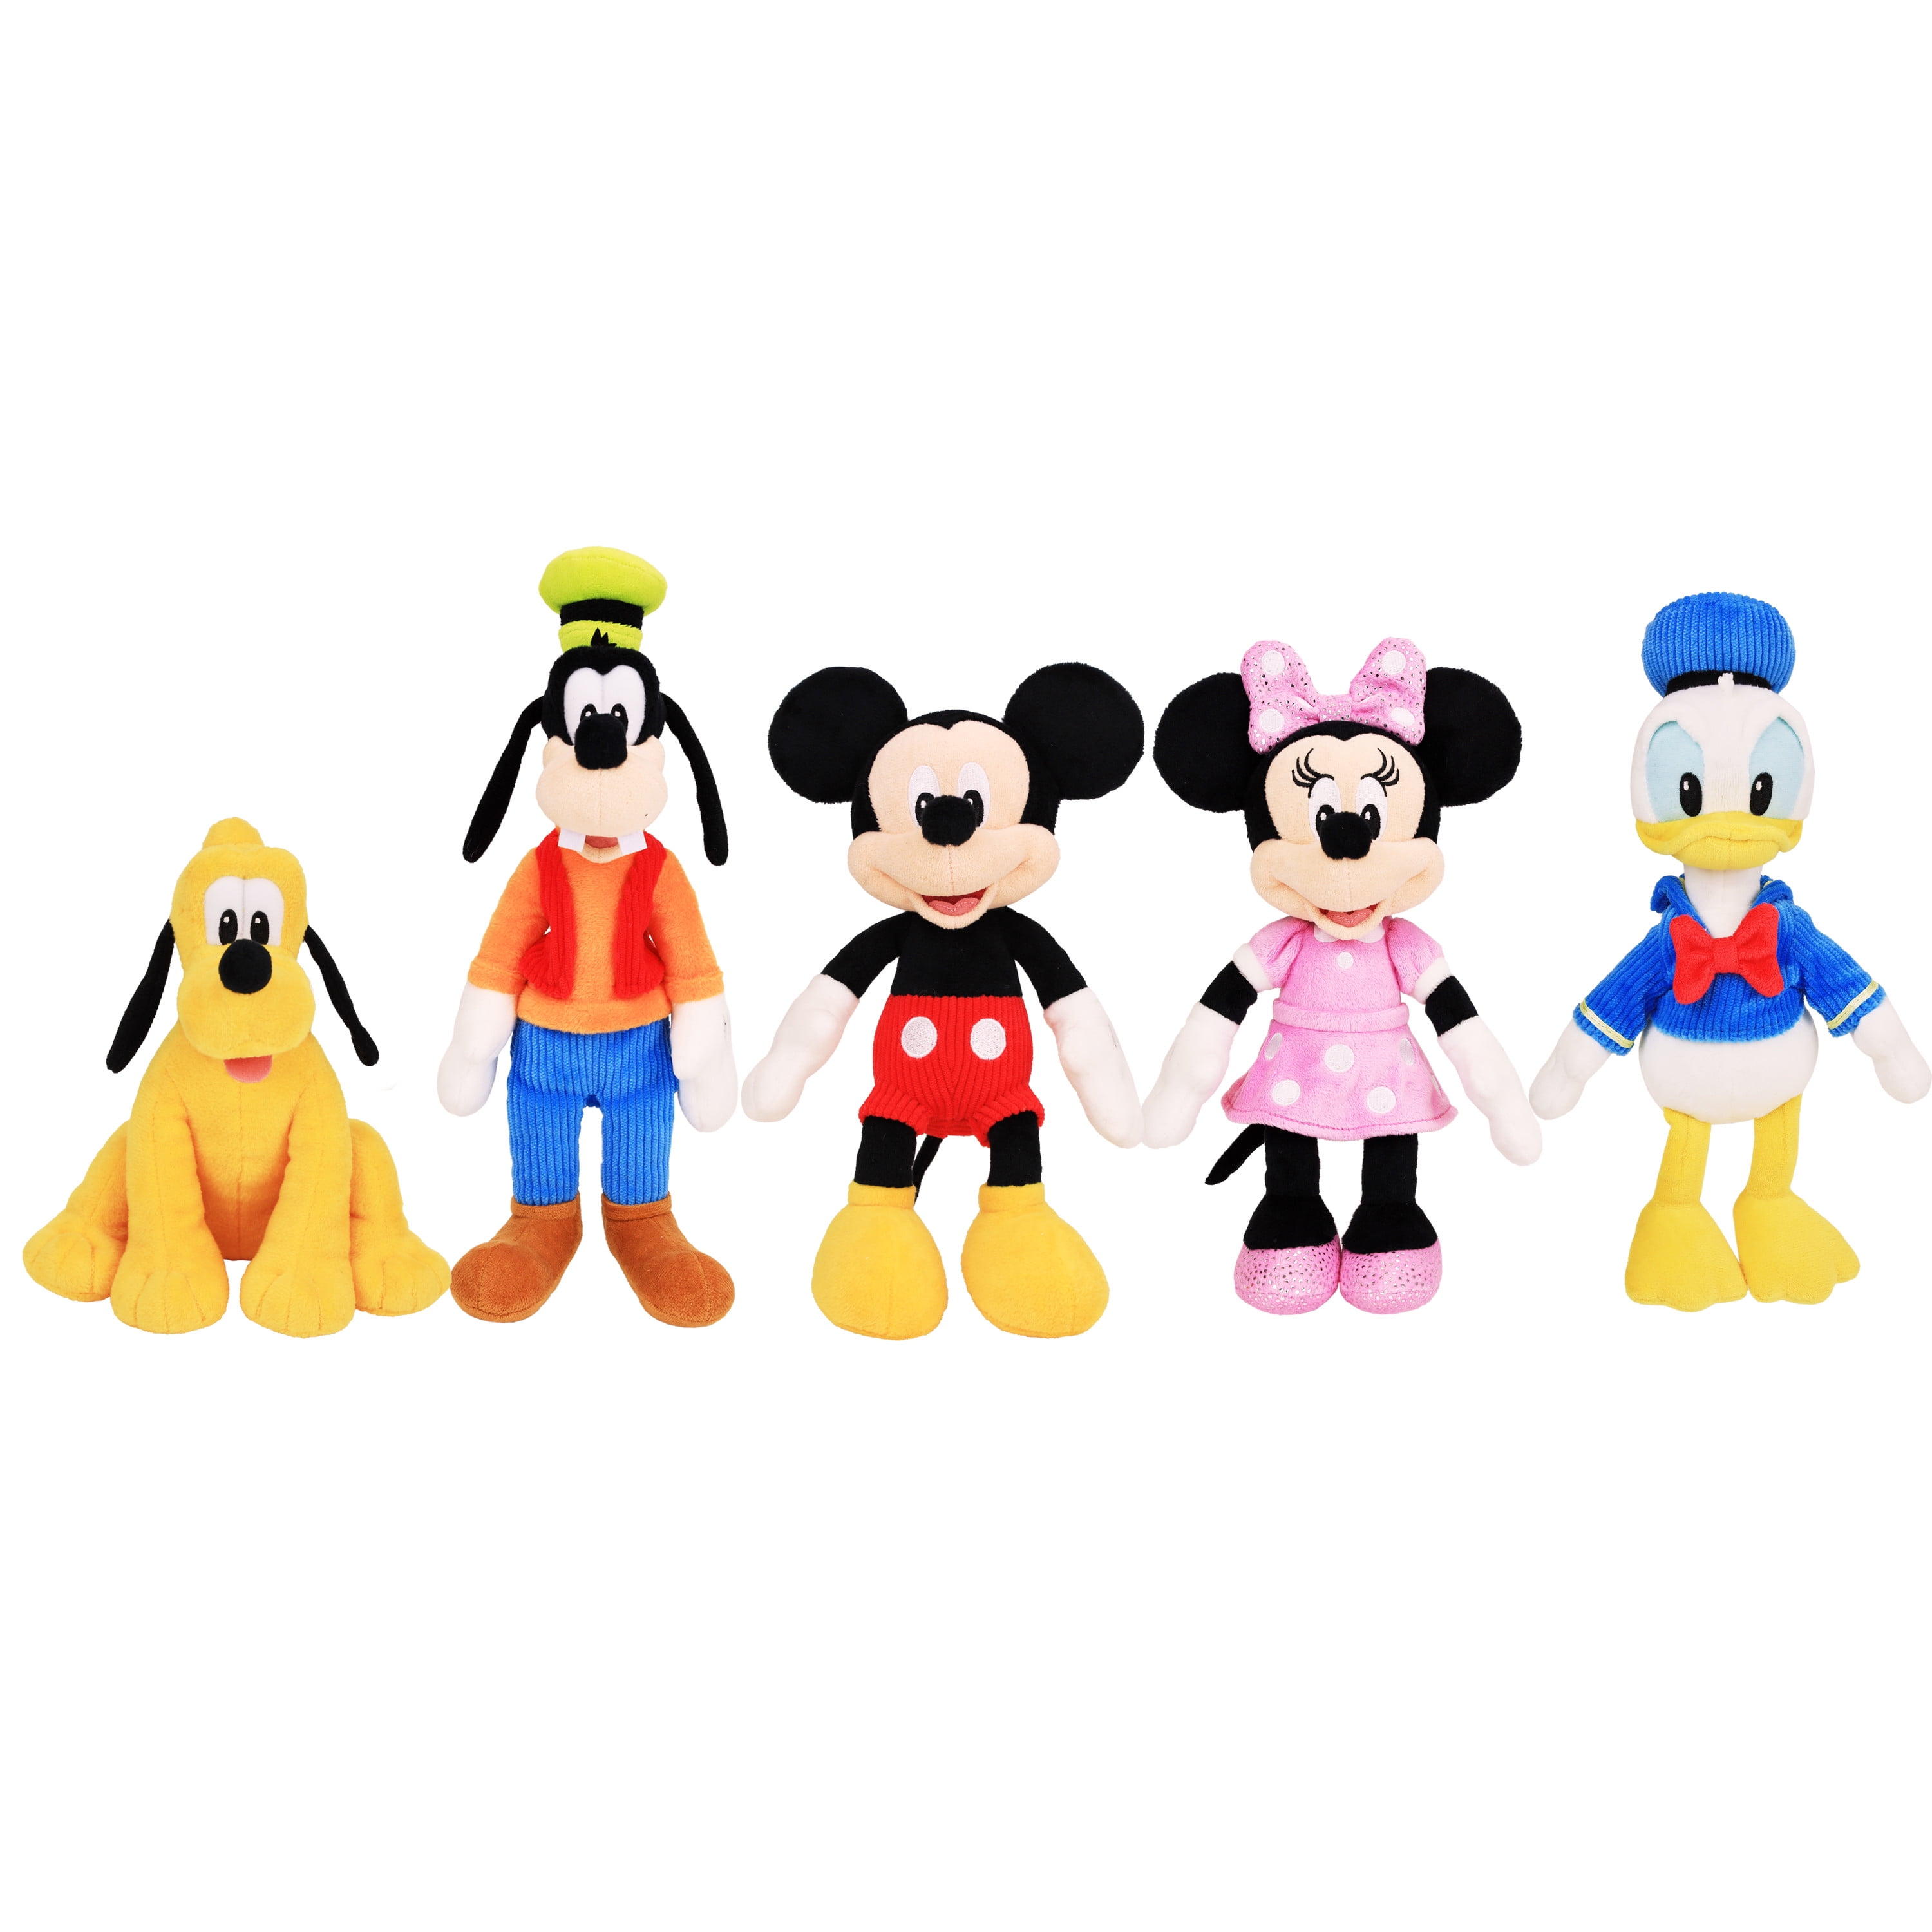 lenen galop Soms Just Play Mickey Mouse Clubhouse 9-inch Bean Plush 5-pack, Mickey Mouse,  Minnie Mouse, Donald Duck, Goofy, and Pluto, Stuffed Animals, Preschool  Ages 2 up - Walmart.com